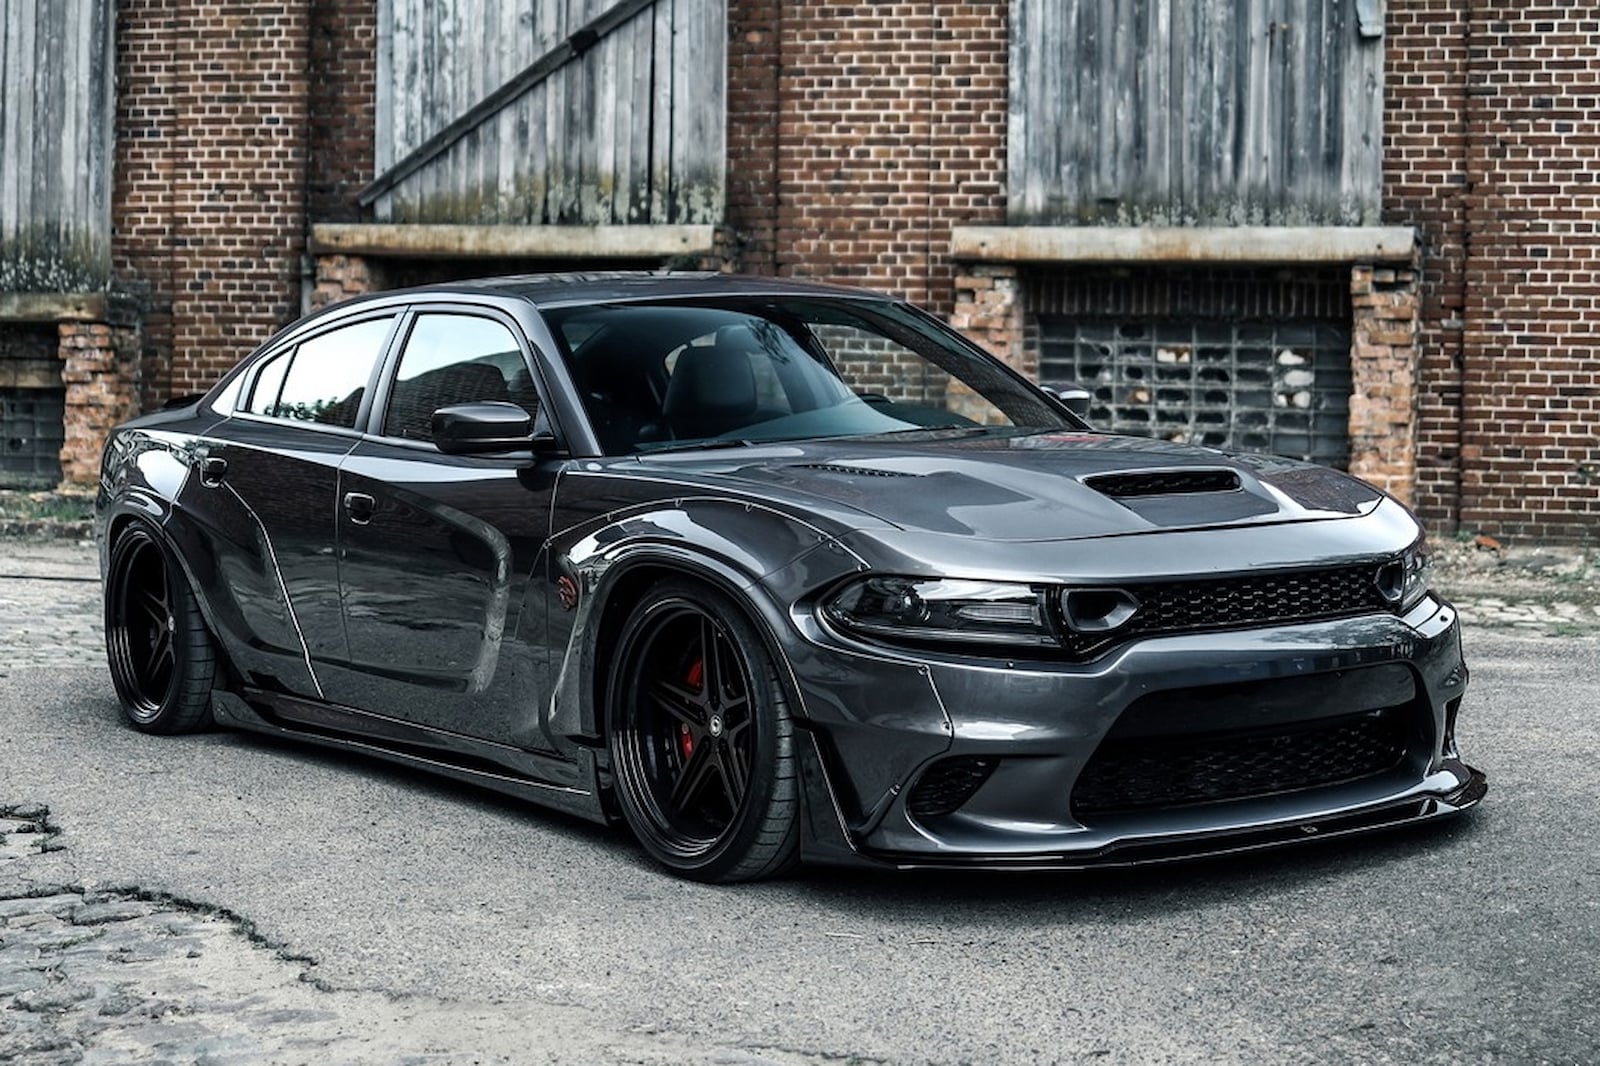 German Firm Makes Widebody Kit For Dodge Charger Hellcat Widebody | CarBuzz